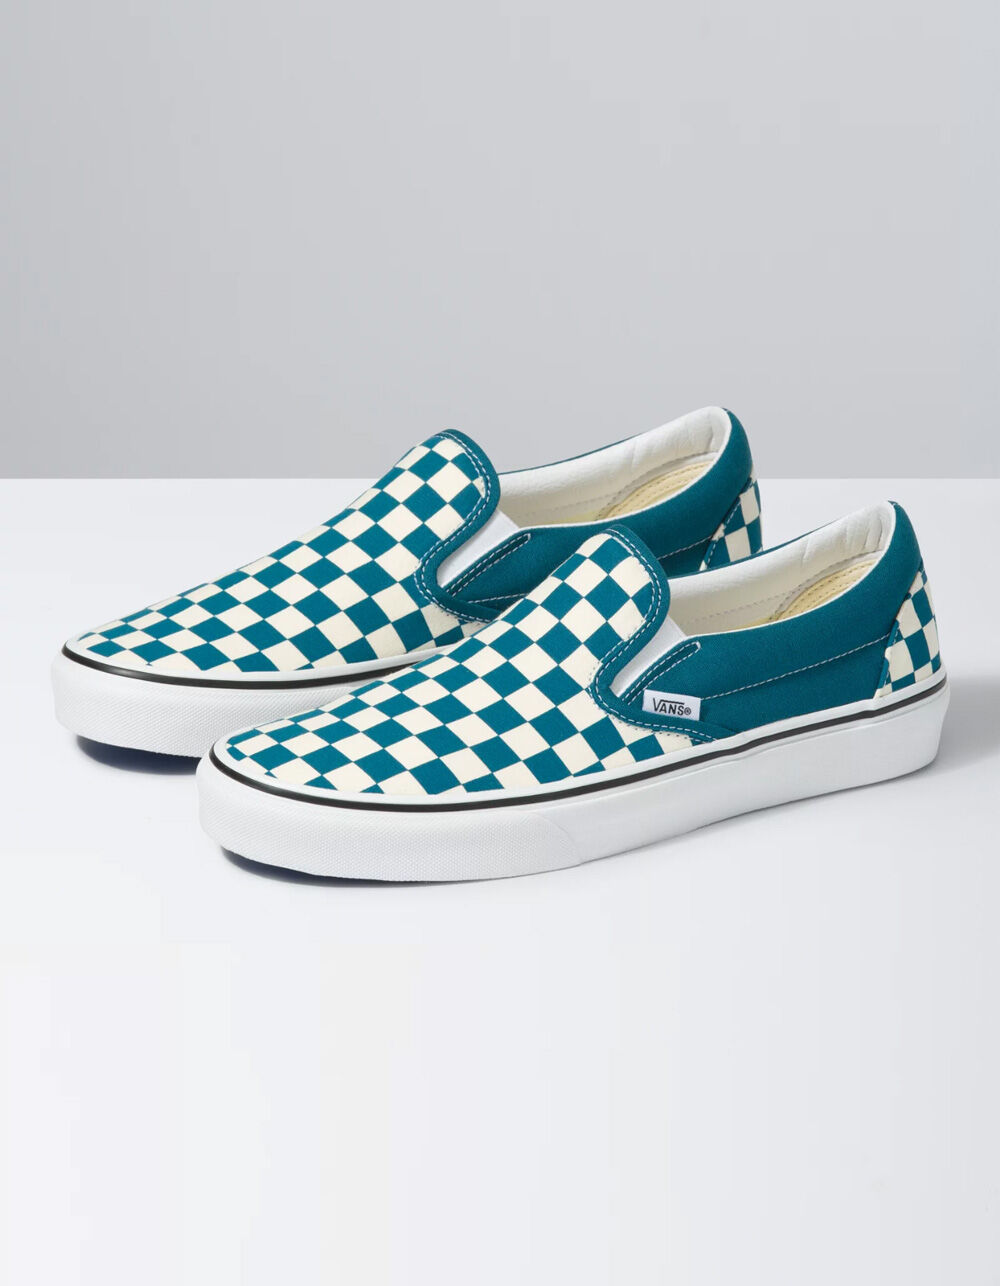 VANS Checkerboard Classic Slip On Shoes - BLUE CORAL/TRUE WHITE | Tillys